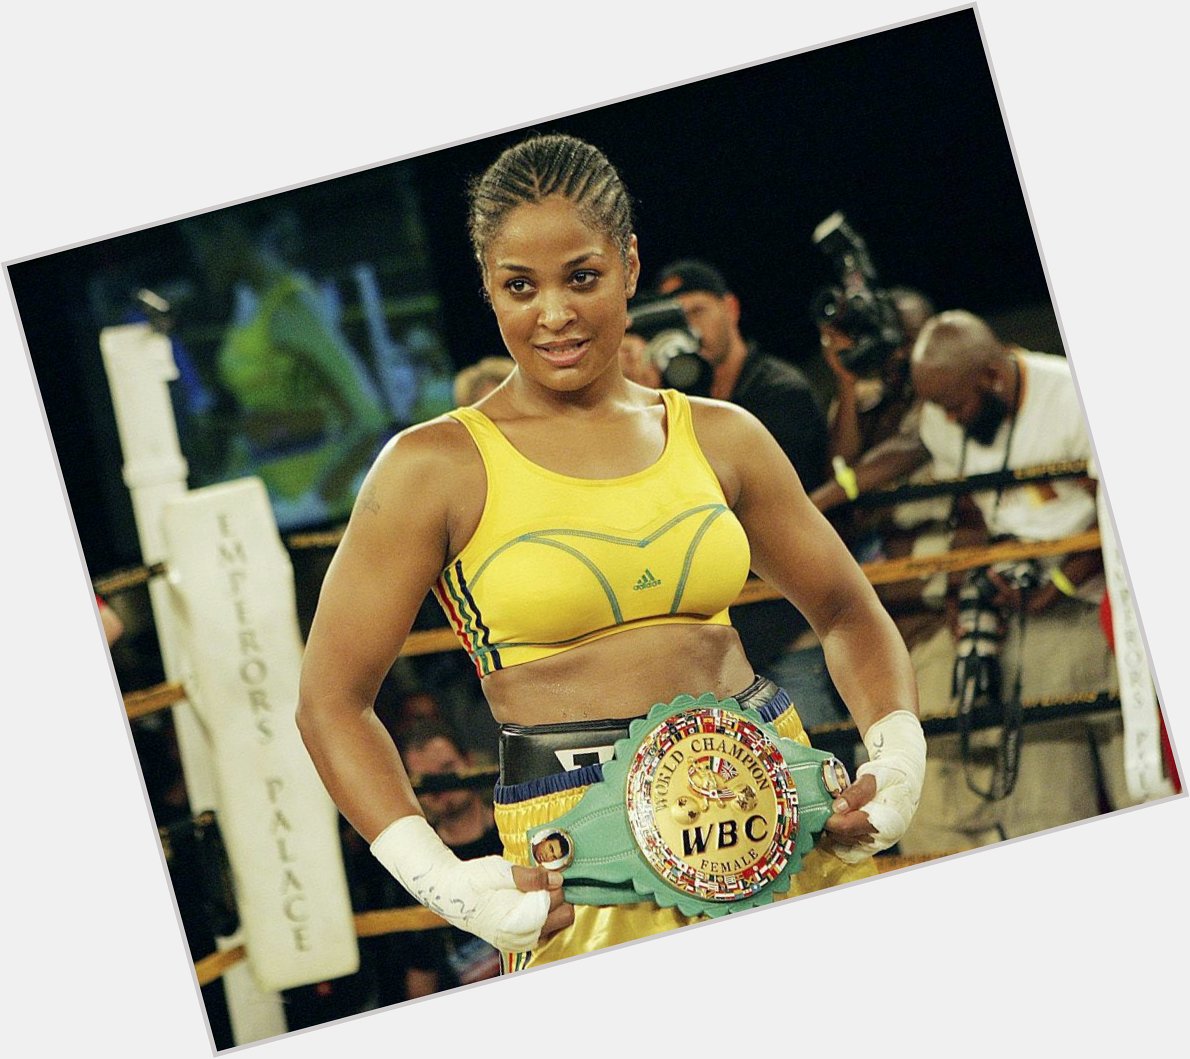 Happy 44th Birthday To Boxing Legend Laila Ali .

Total fights: 24
Wins: 24
Wins by KO: 21
Losses: 0 